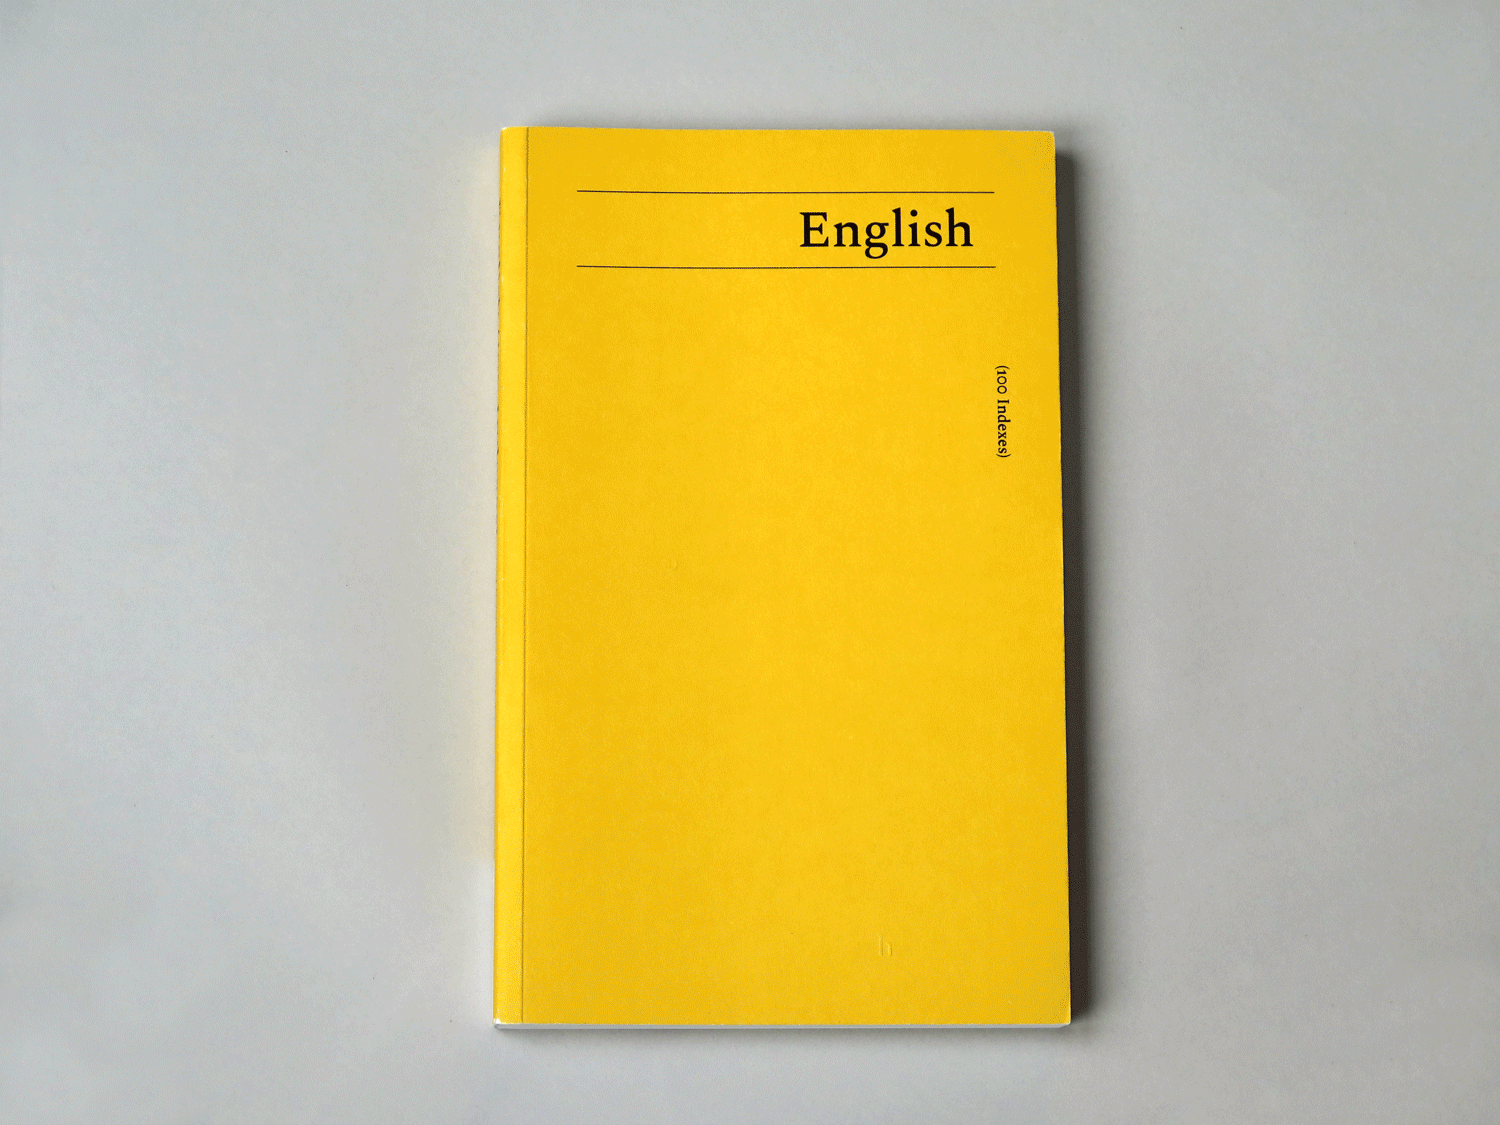 Printed at Raddraaier, Amsterdam, The Netherlands.

A collection of indexes to different English language learning books are accompanied by a prologue and visual endnotes that refer to specific words from the indexes. A book by Dongyoung Lee in collaboration with Martijn in 't Veld and Martín La Roche. Published by Good Neighbour. Edition of 250